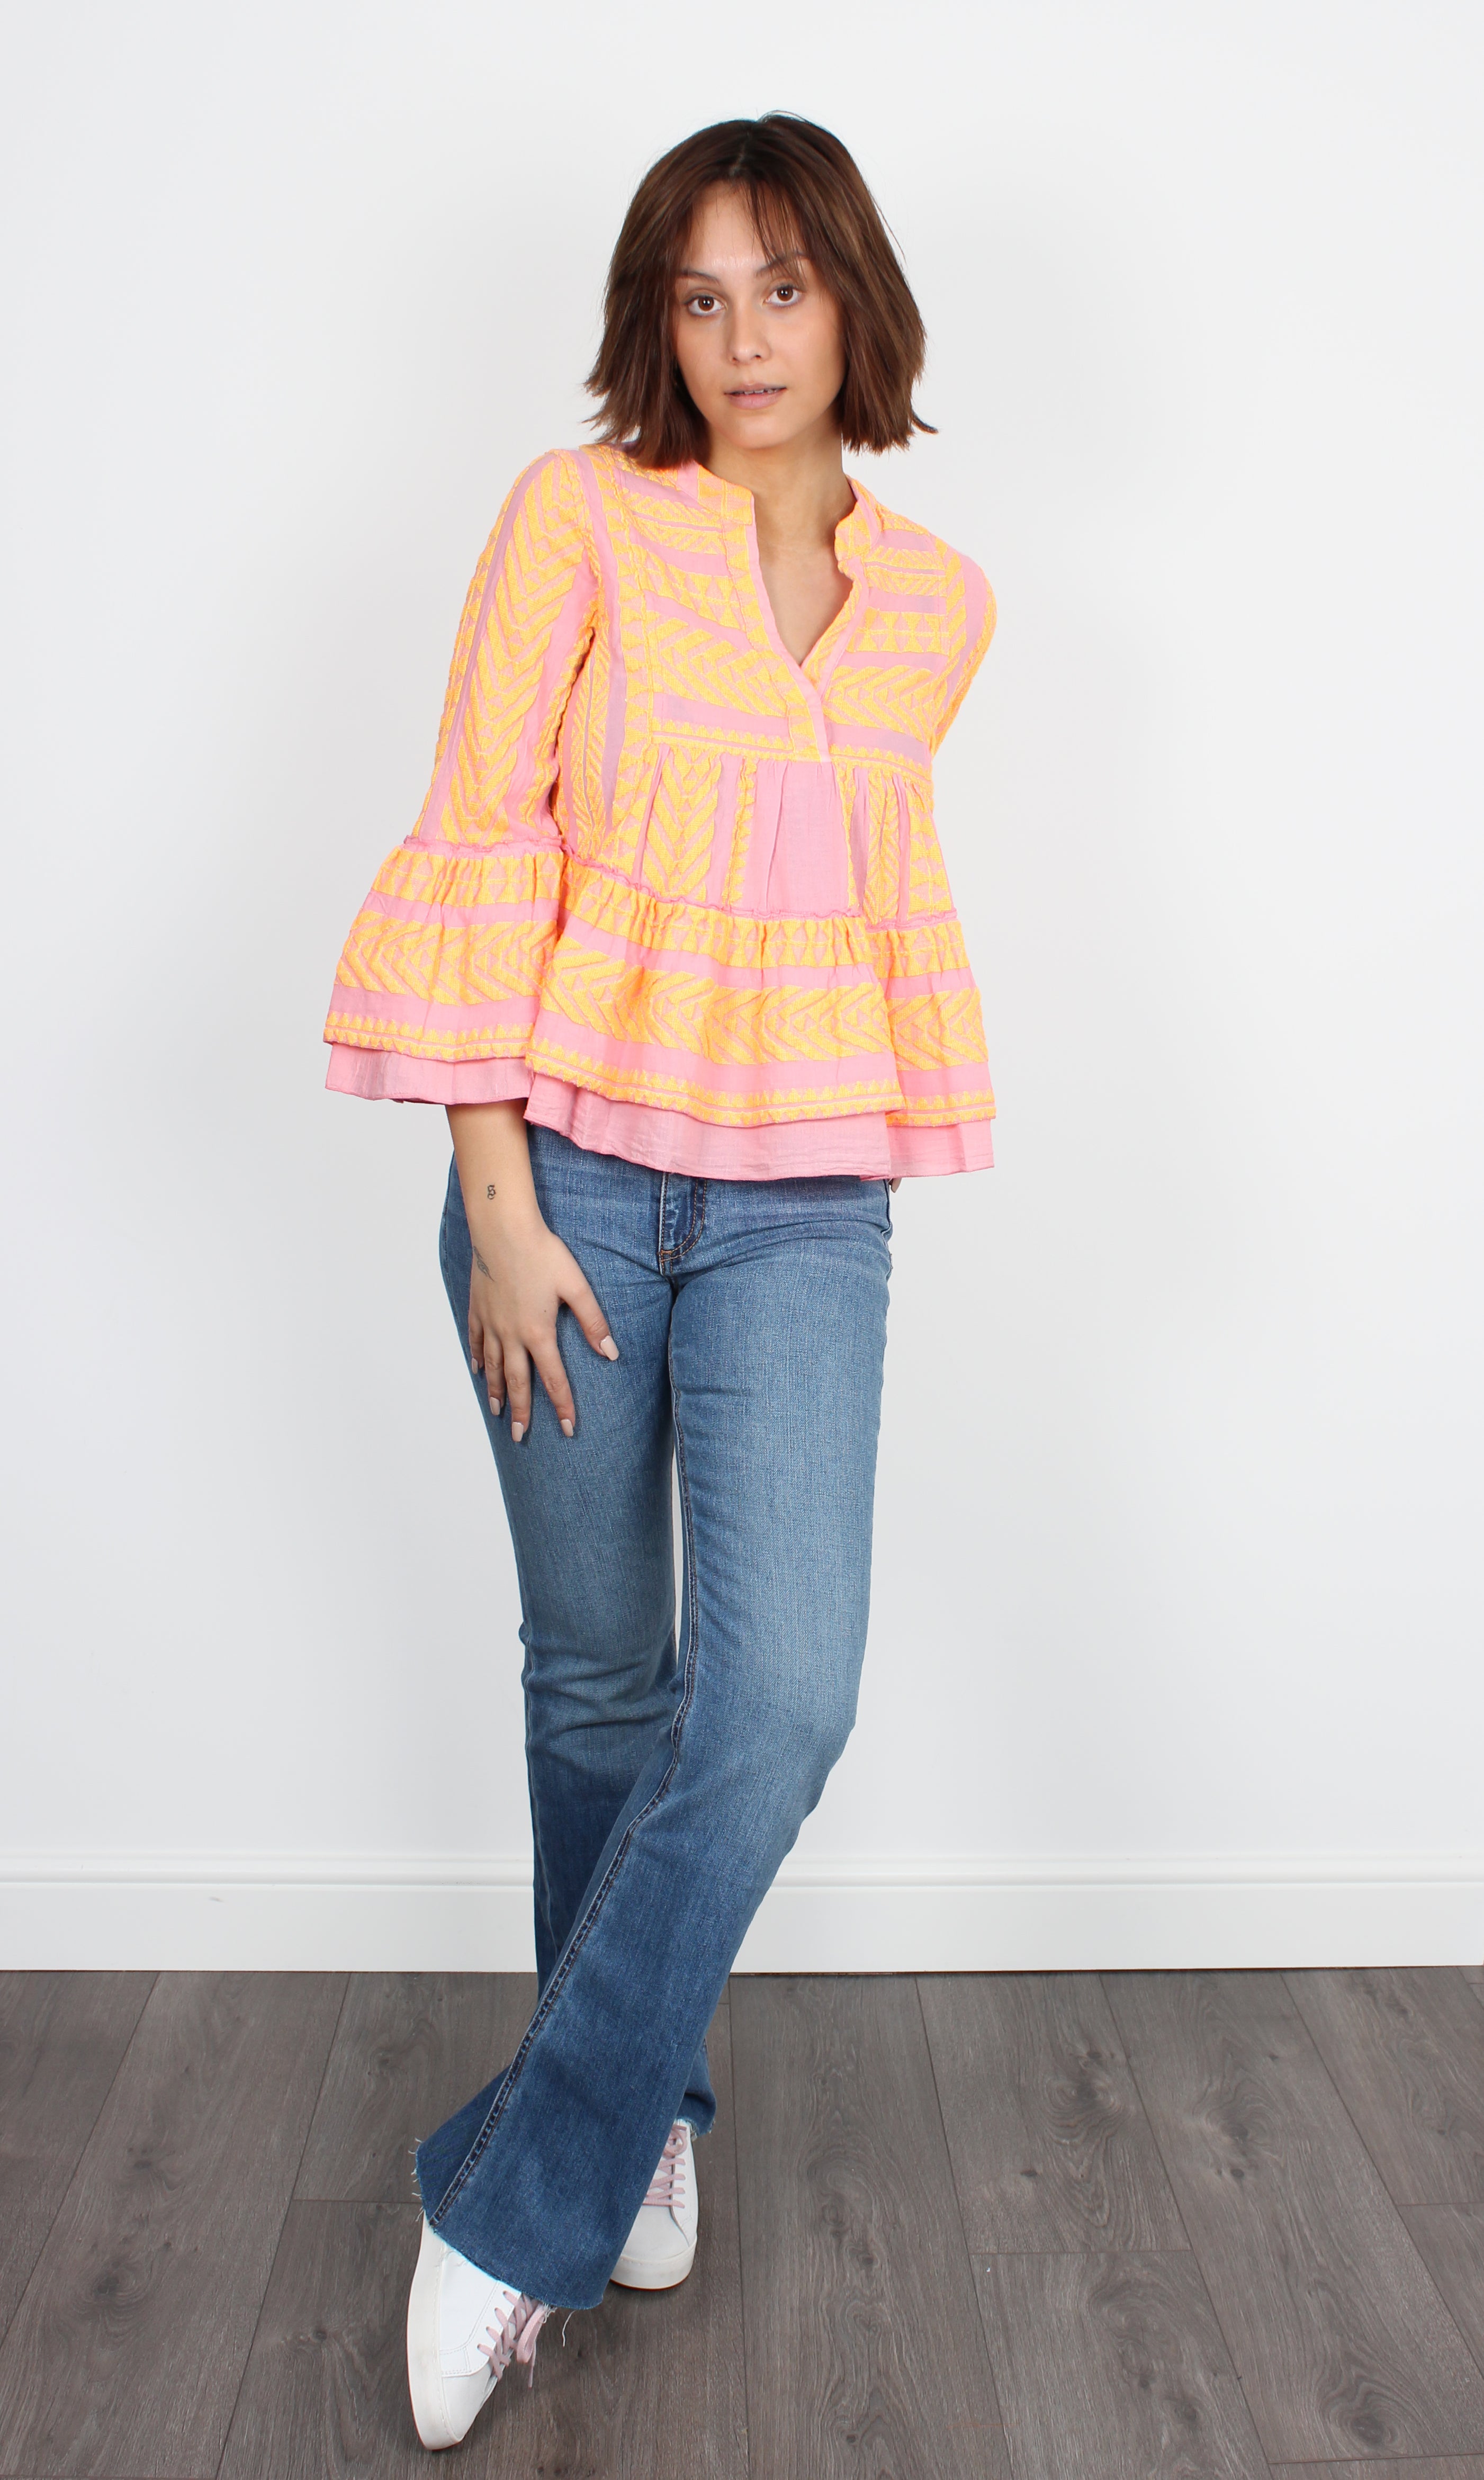 Armonia Top 262 in Neon Lime Orange and Pink